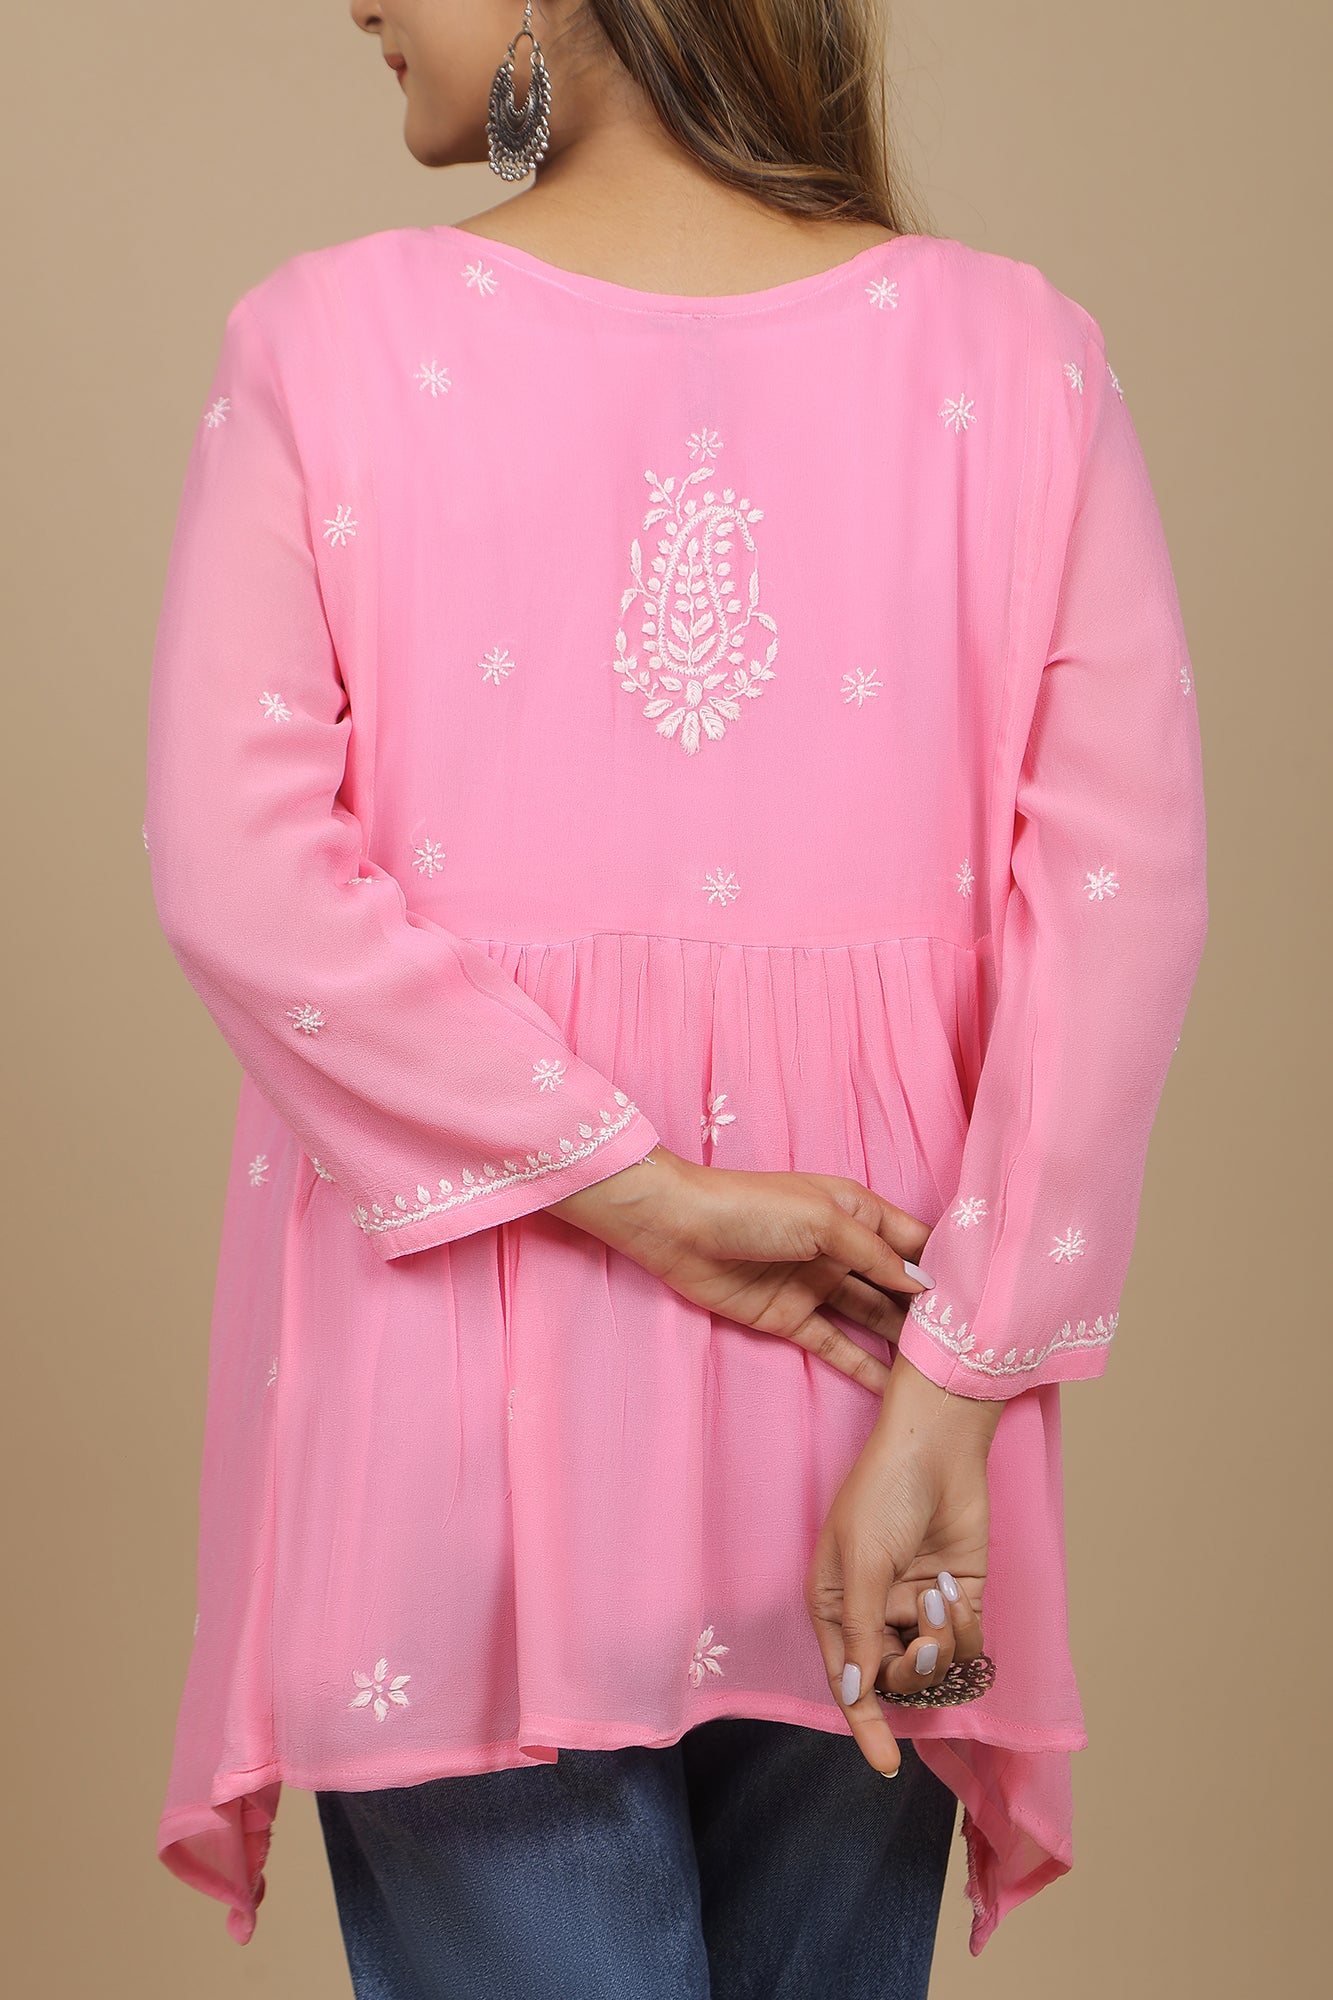 Pink Georgette with White Chikankari embroidery Top